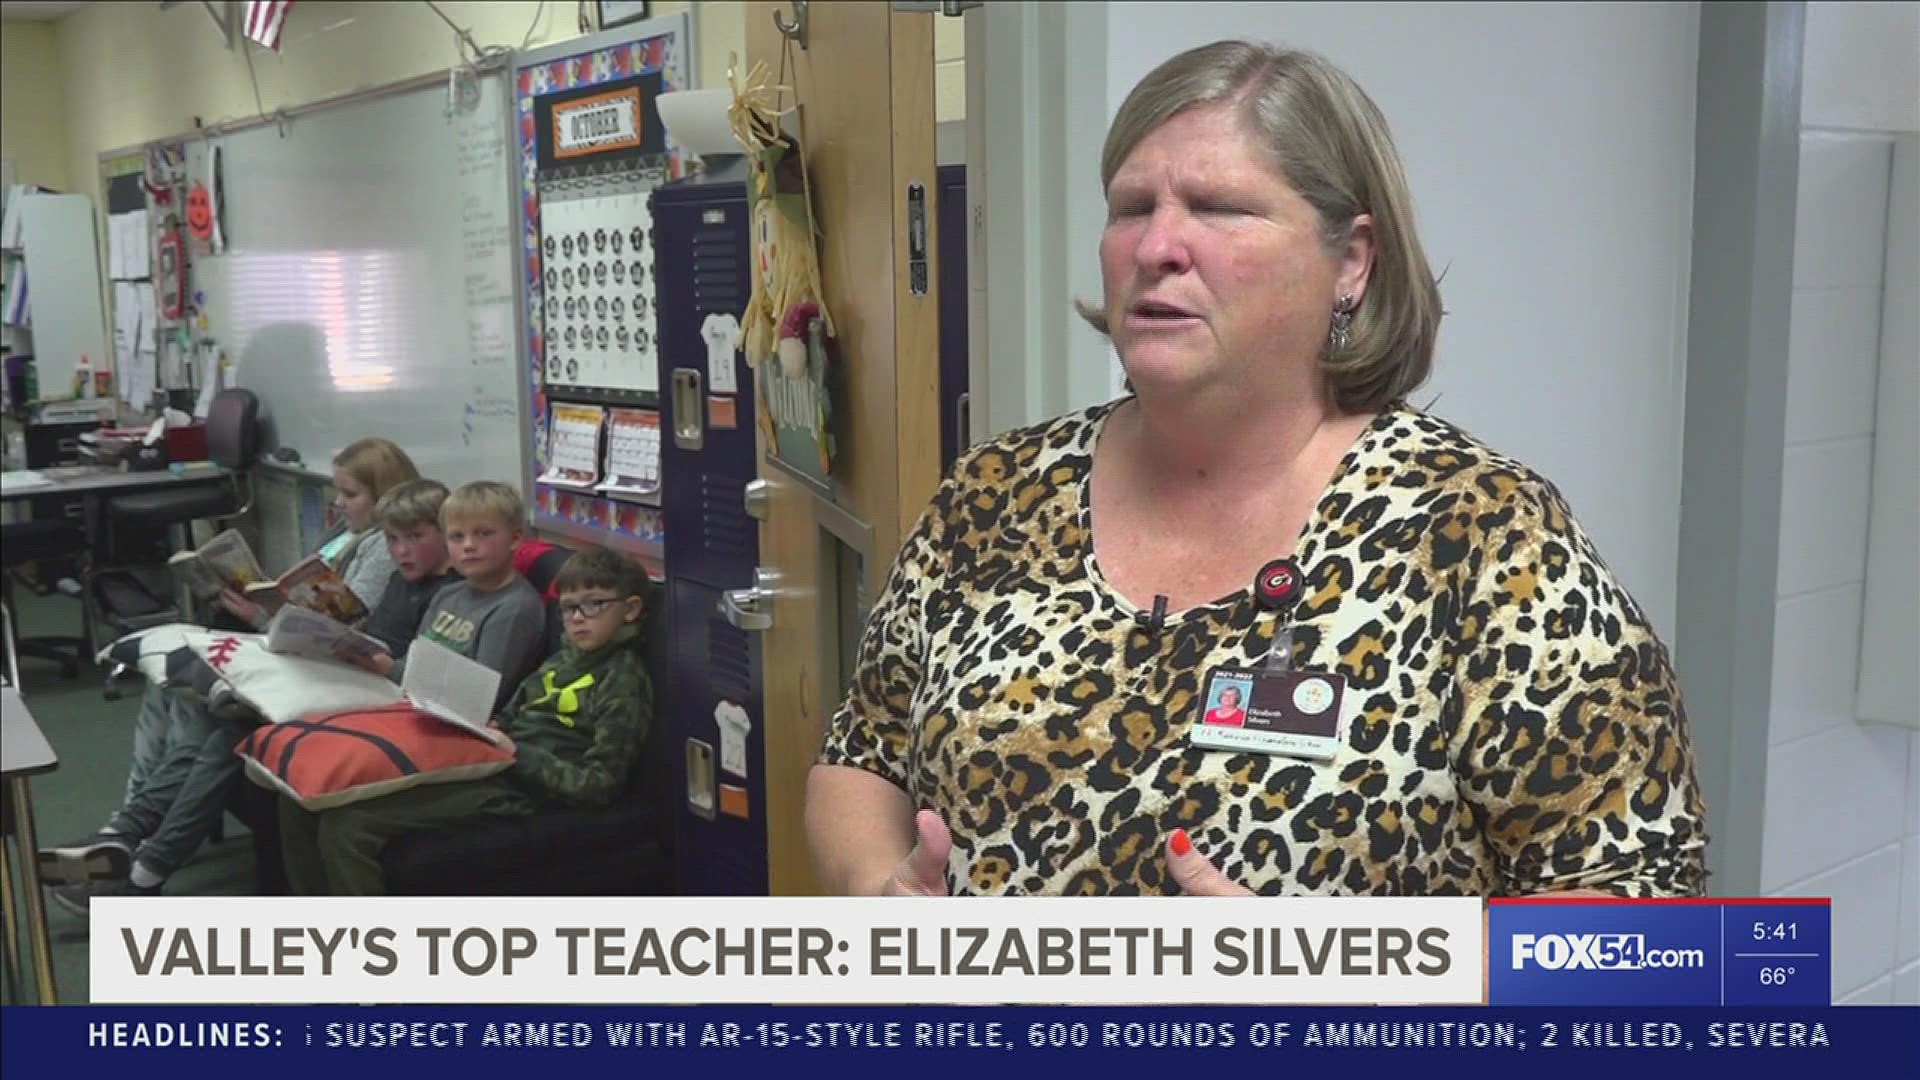 A teacher in Hartselle realizes her gift in teaching.... And others see it too... Congratulations to Mrs. Elizabeth Silvers!